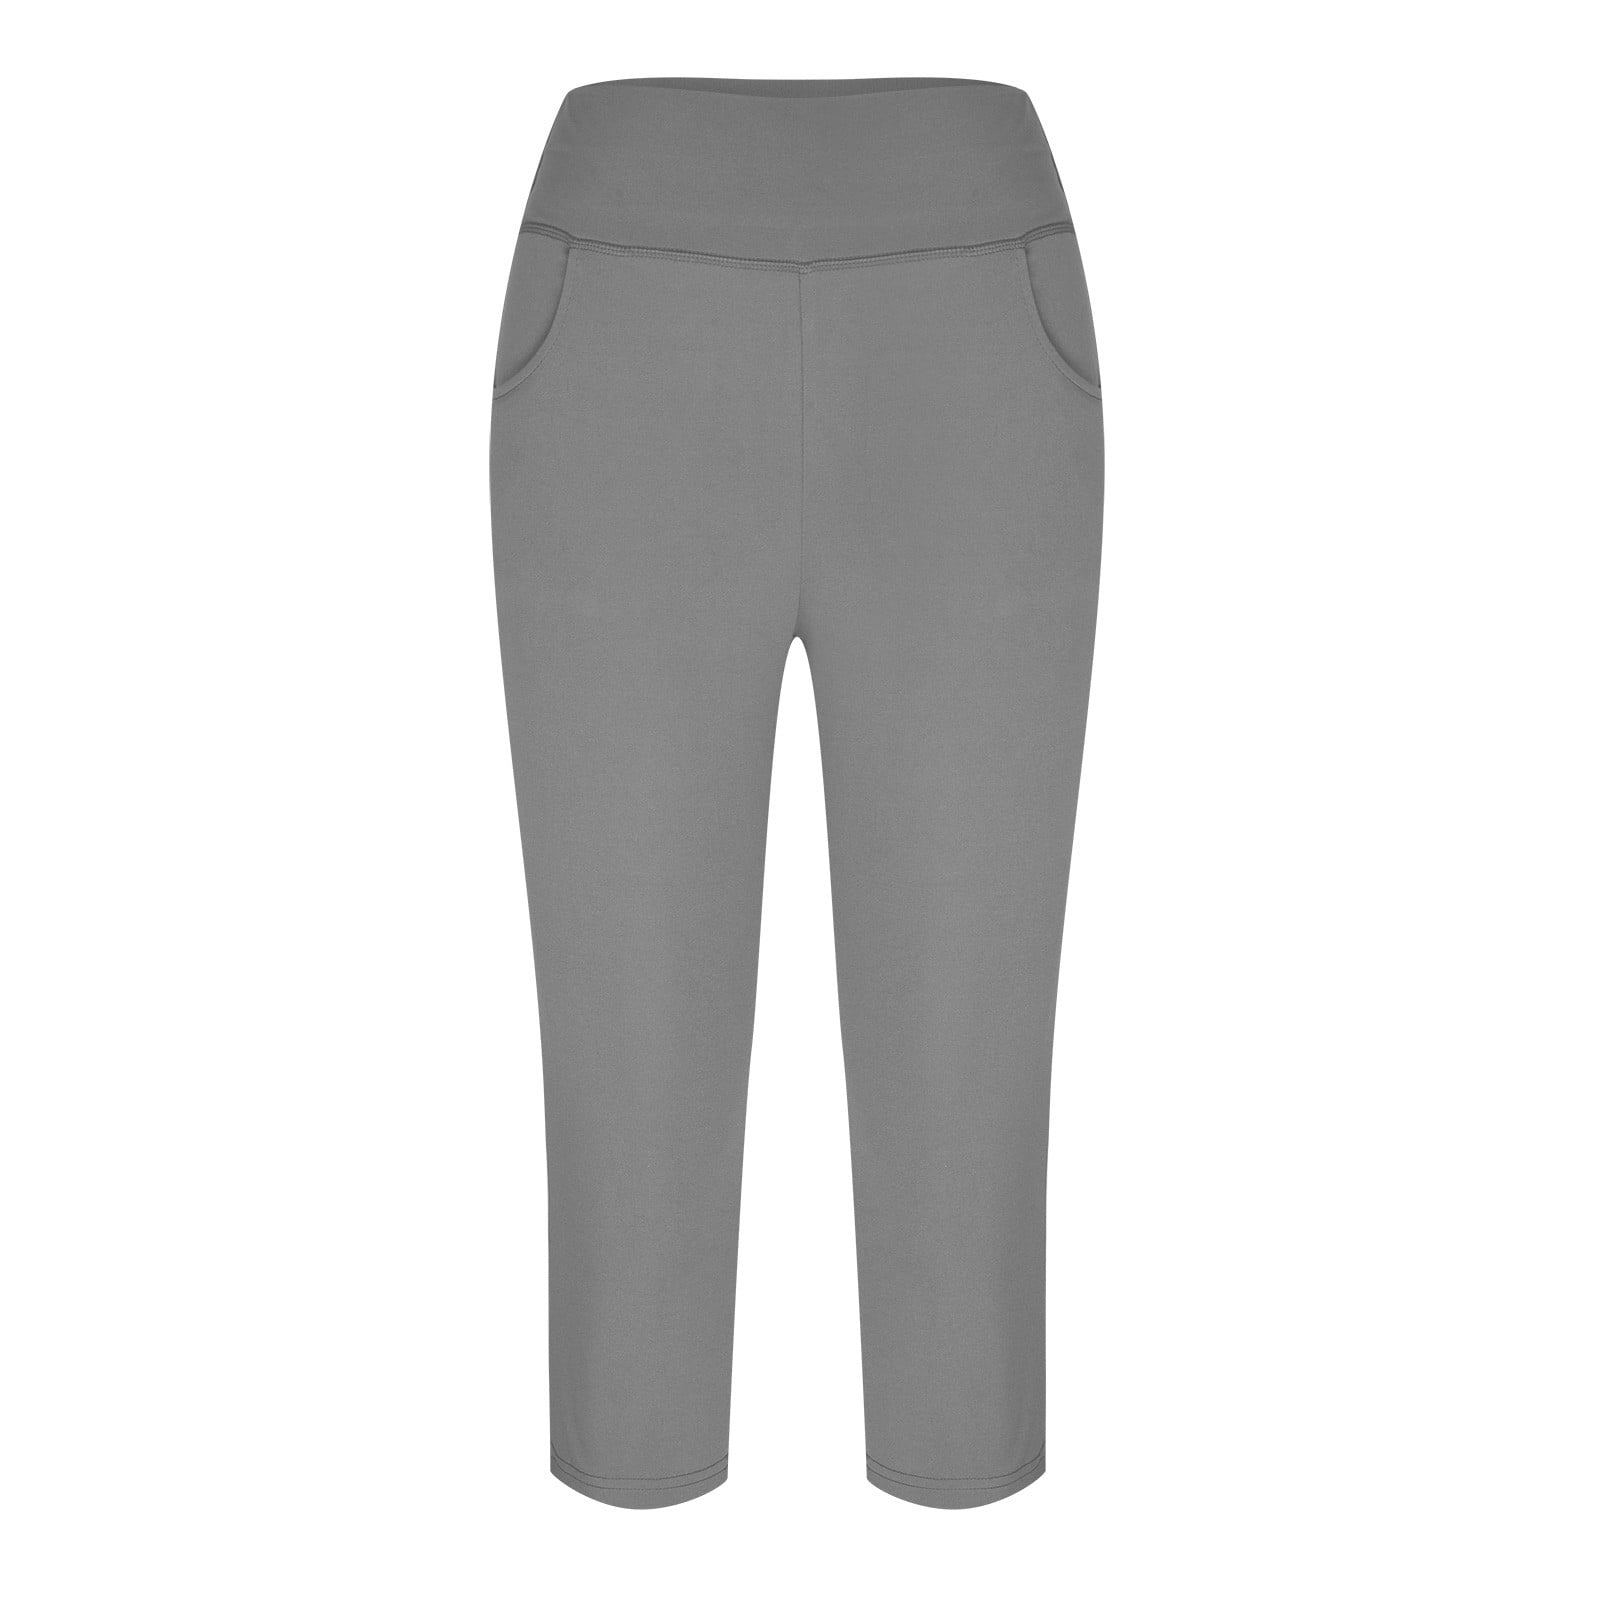 Women Capris High Waist Casual Gym Workout Leggings with Pockets